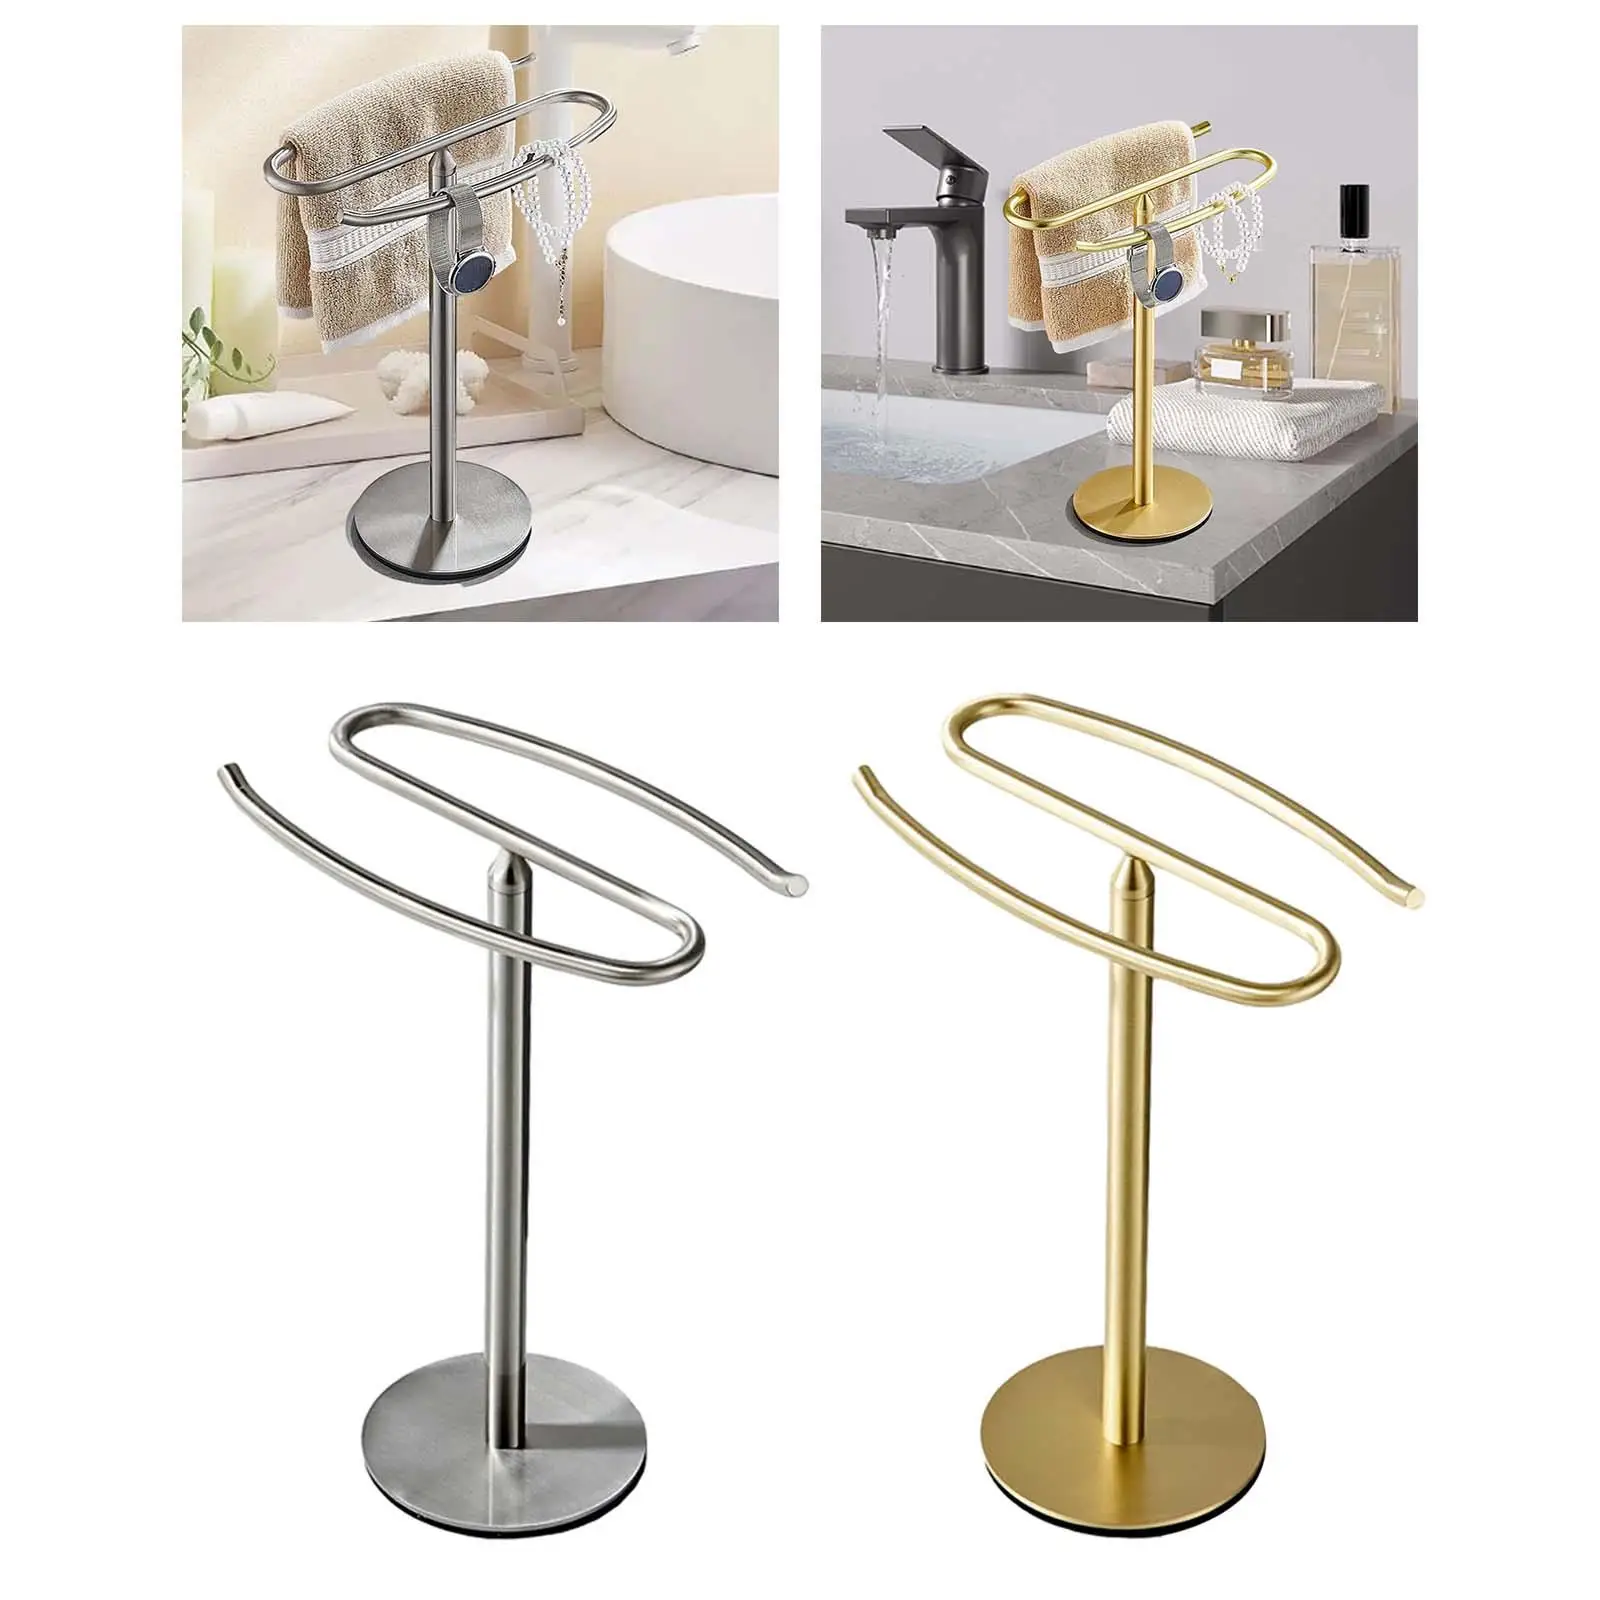 Towel Bar Rack Necklace Holder Stainless Steel Heavy Weighted Base Rust Resistant Versatile for Vanity Countertop Accessories